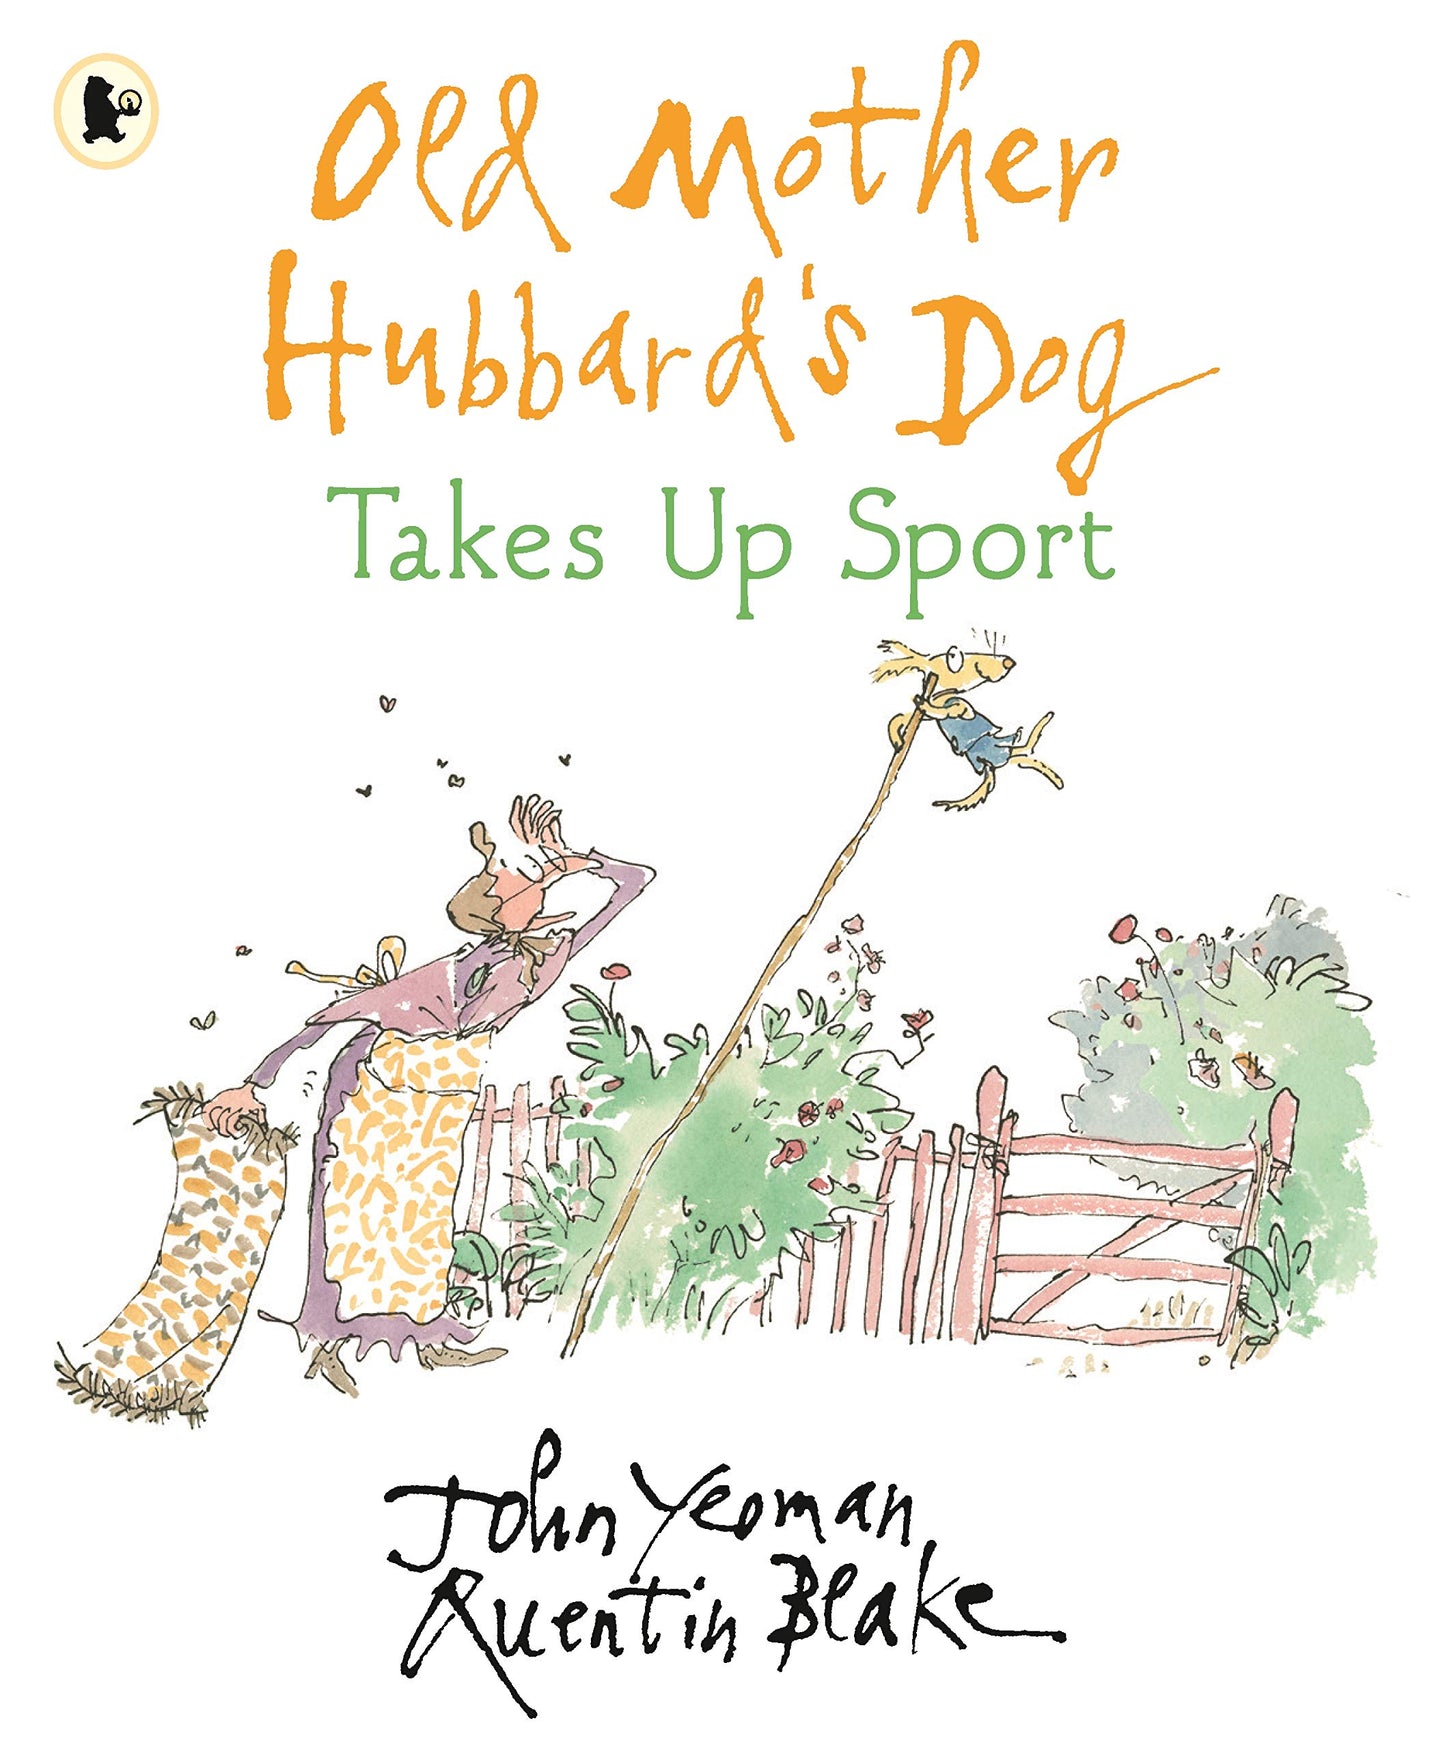 Old Mother Hubbard’s Dog Takes Up Sport by John Yeoman and Quentin Blake